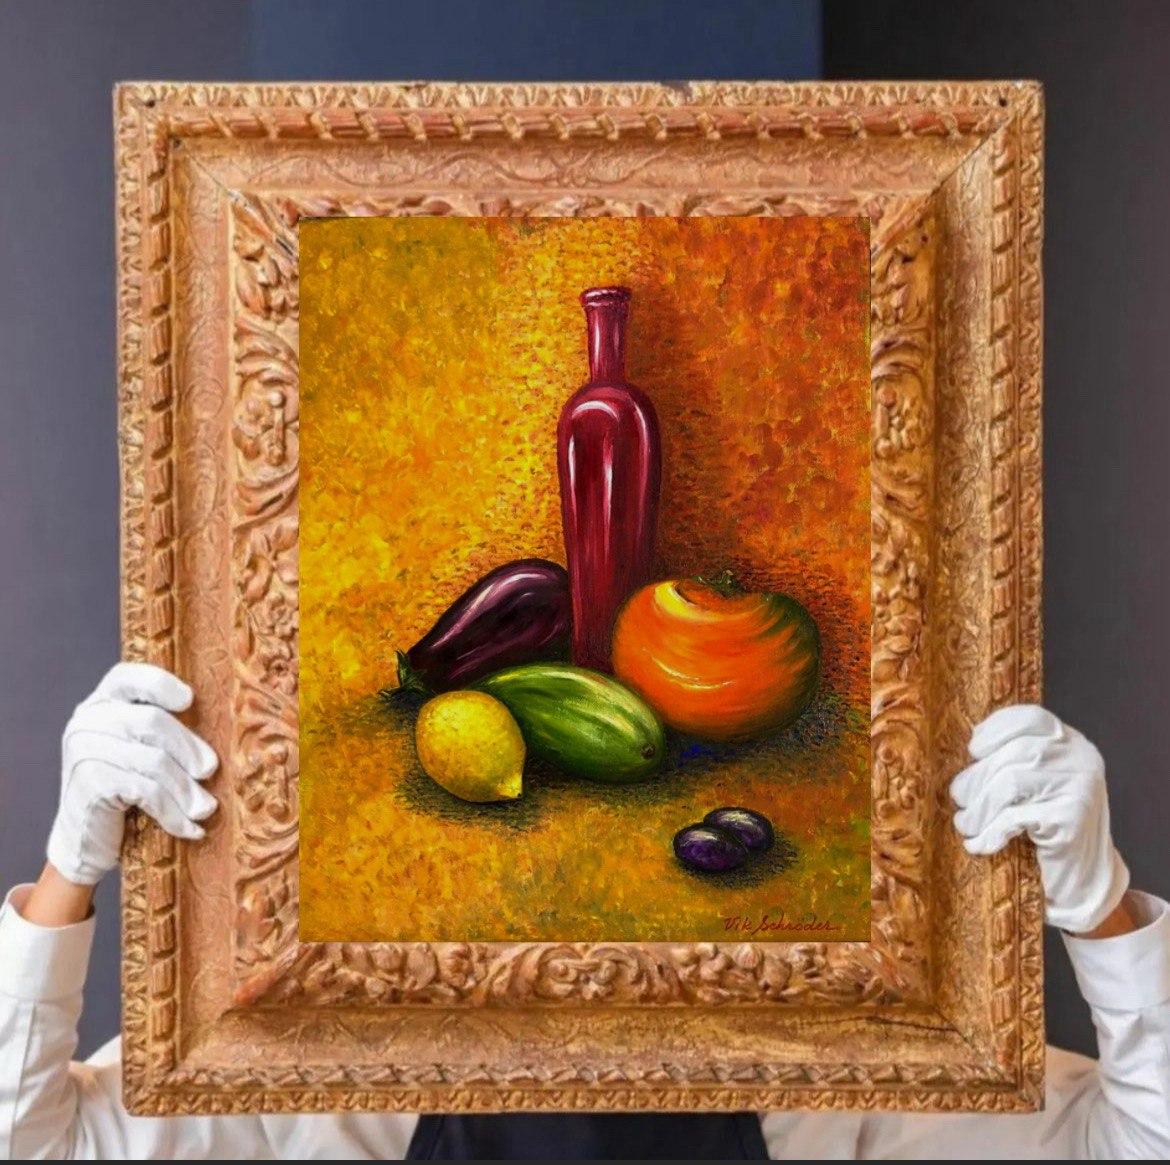  It may be healthy. Oil painting. Impressionism style. Still life 50/40 cm. - Abstract Impressionist Painting by Vik Schroeder 